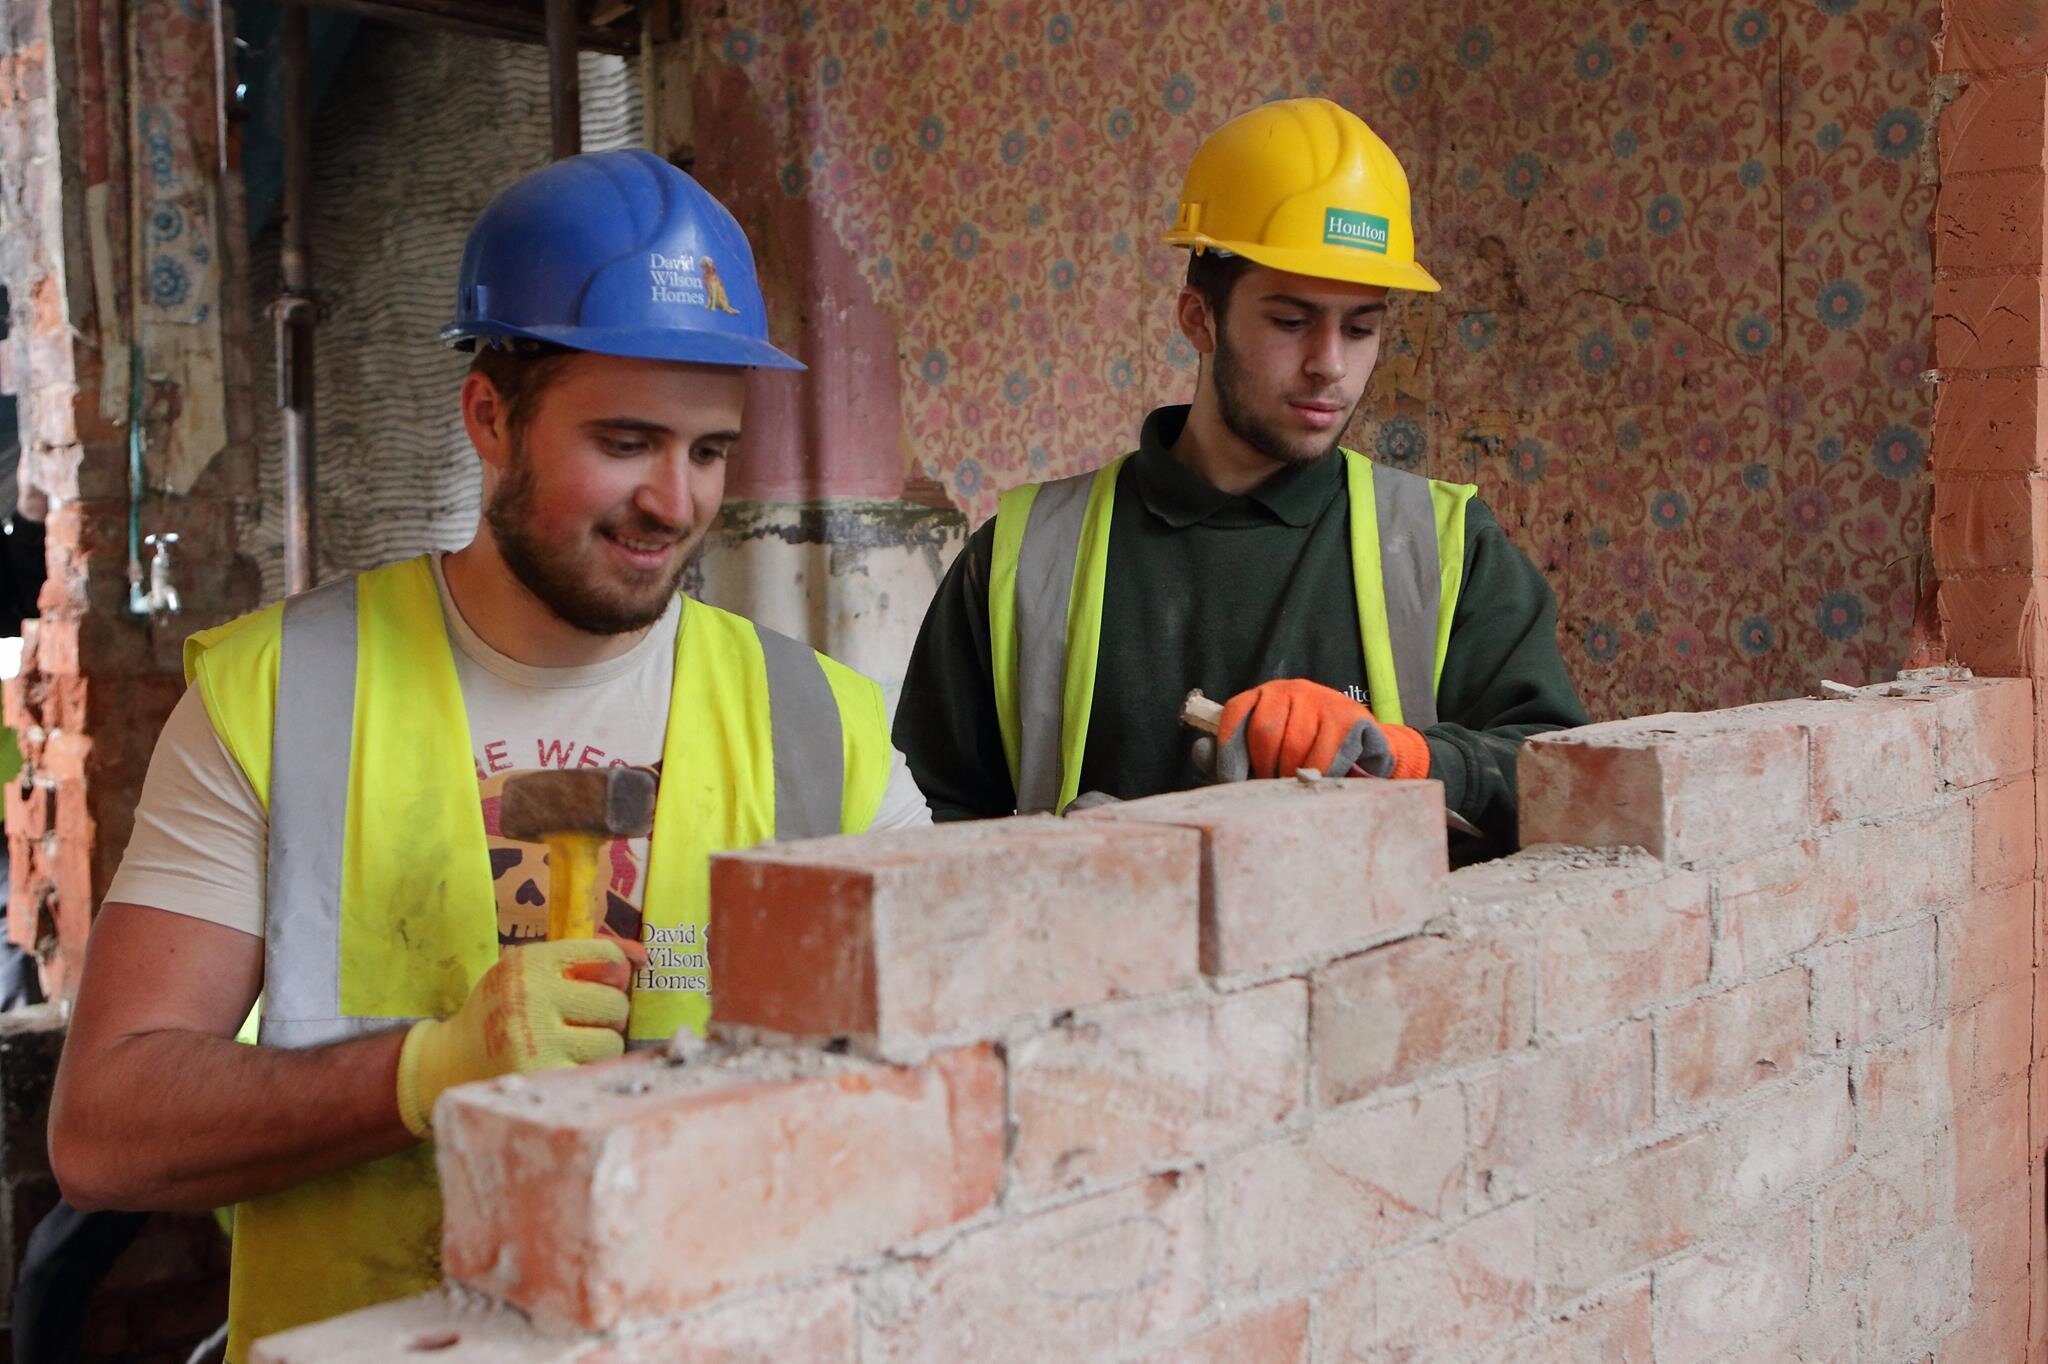 Award winning Probe's Empty Homes Partnership brings derelict properties in Hull back into habitable use, with a workforce of students and apprentices.